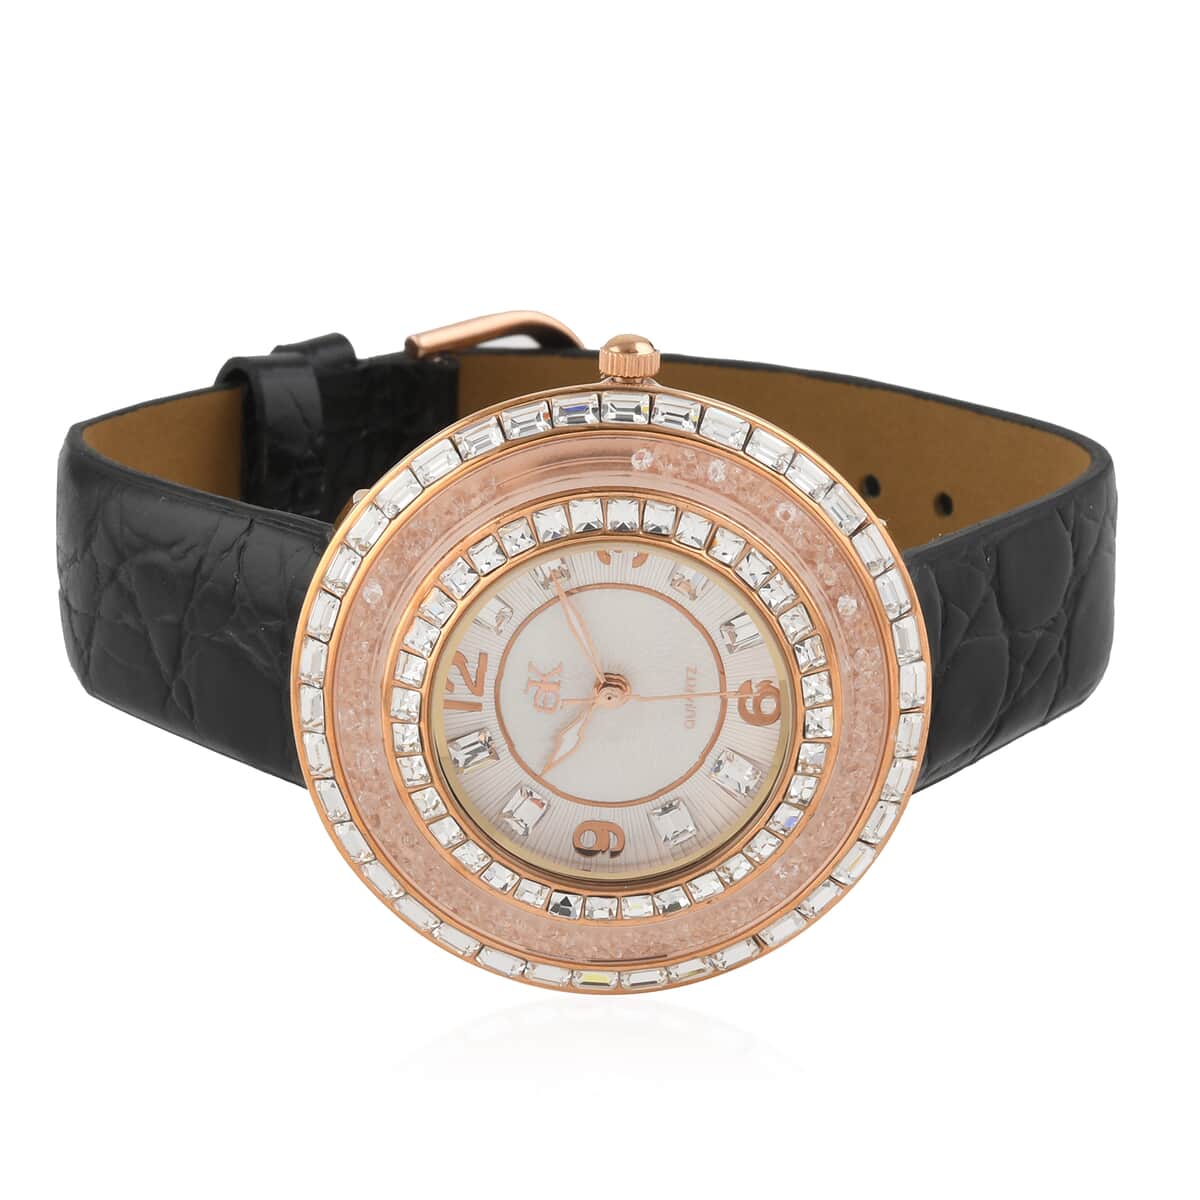 ADEE KAYE Facetta Austrian Crystal Japanese Movement Watch with Genuine Leather Strap in Light Pink (45mm) , Designer Leather Watch , Analog Luxury Wristwatch image number 2